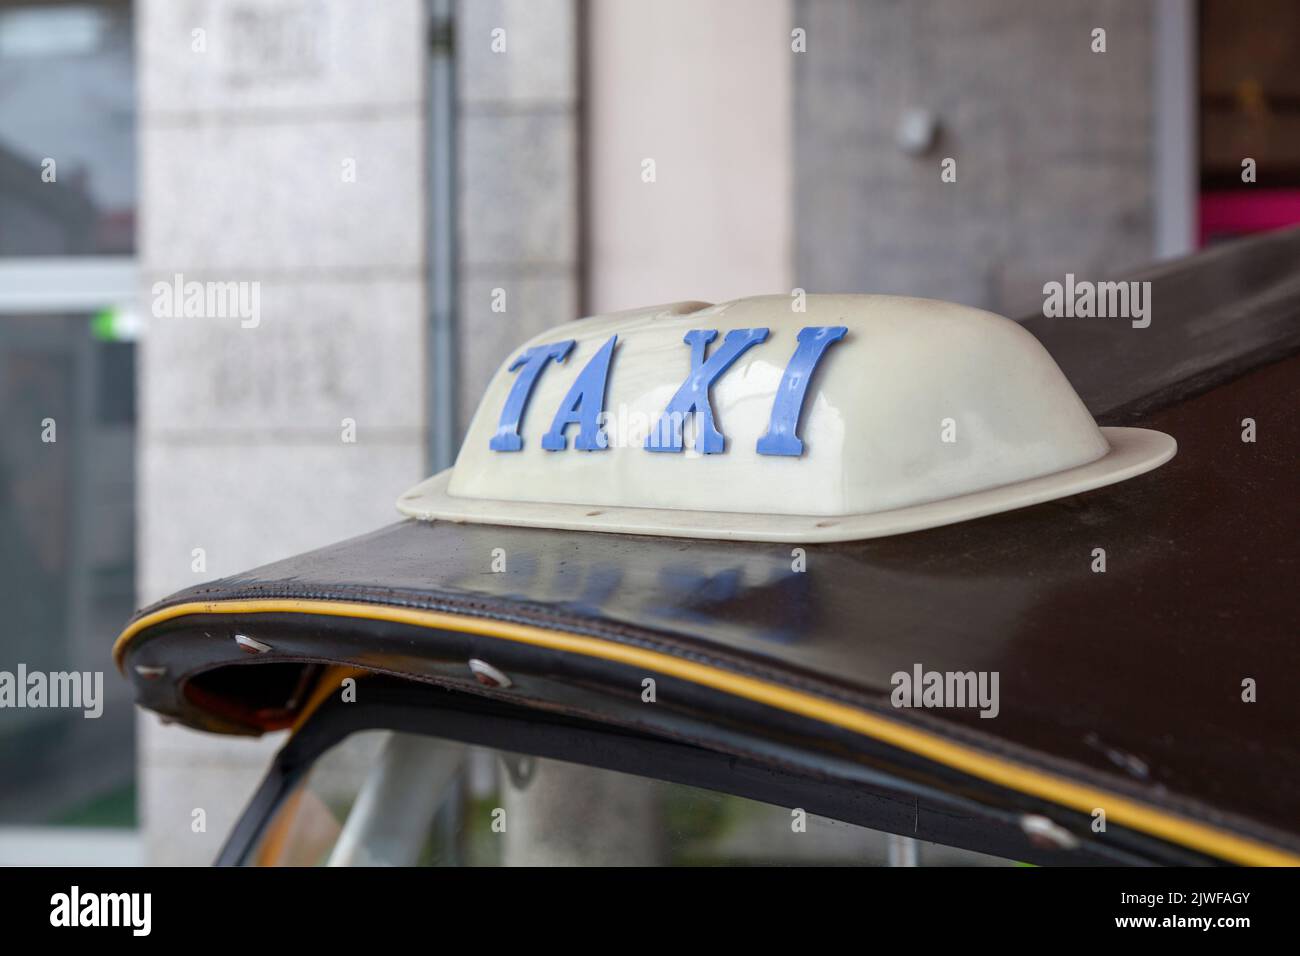 Taxi sign on the roof of a tuk tuk in Bangkok, Thailand. Stock Photo